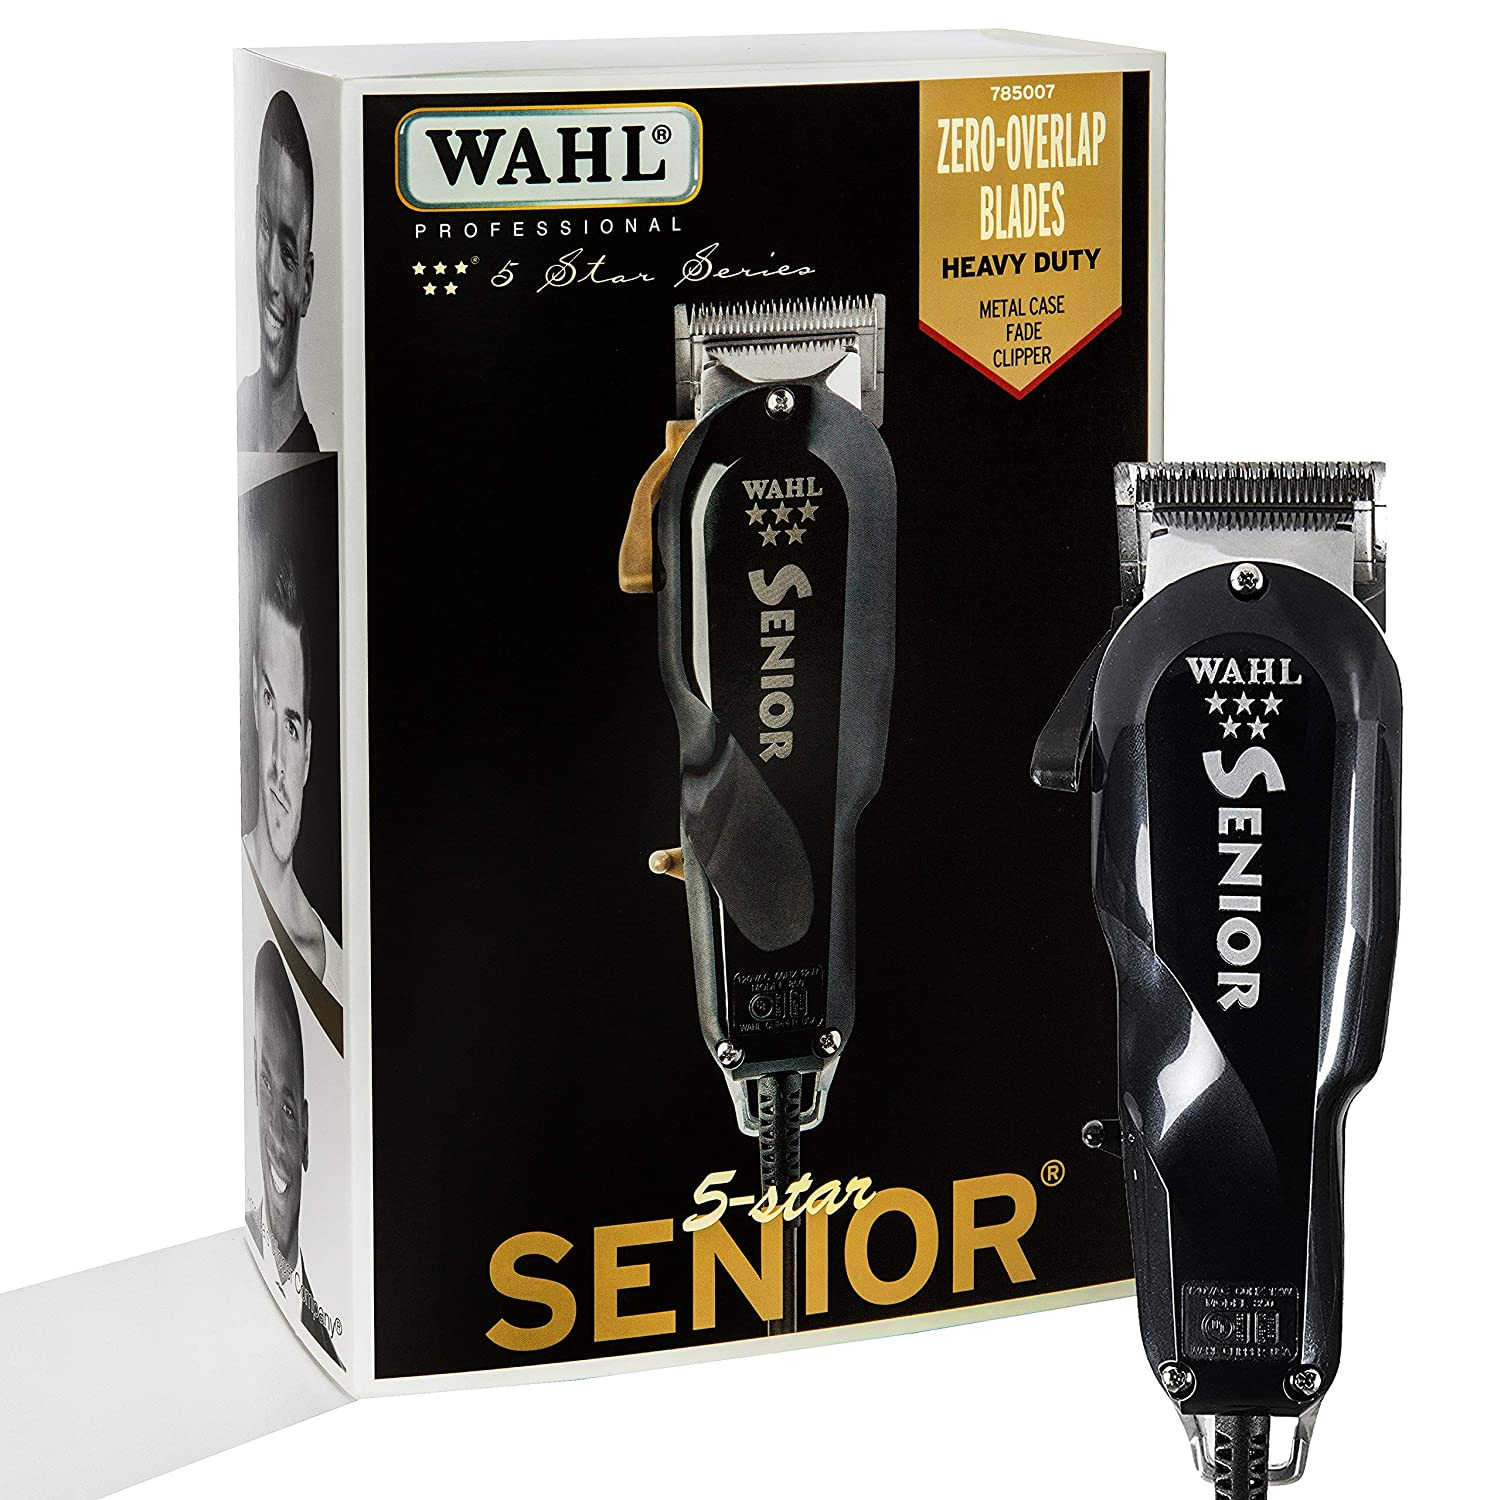 Wahl 5 Star Senior Clippers